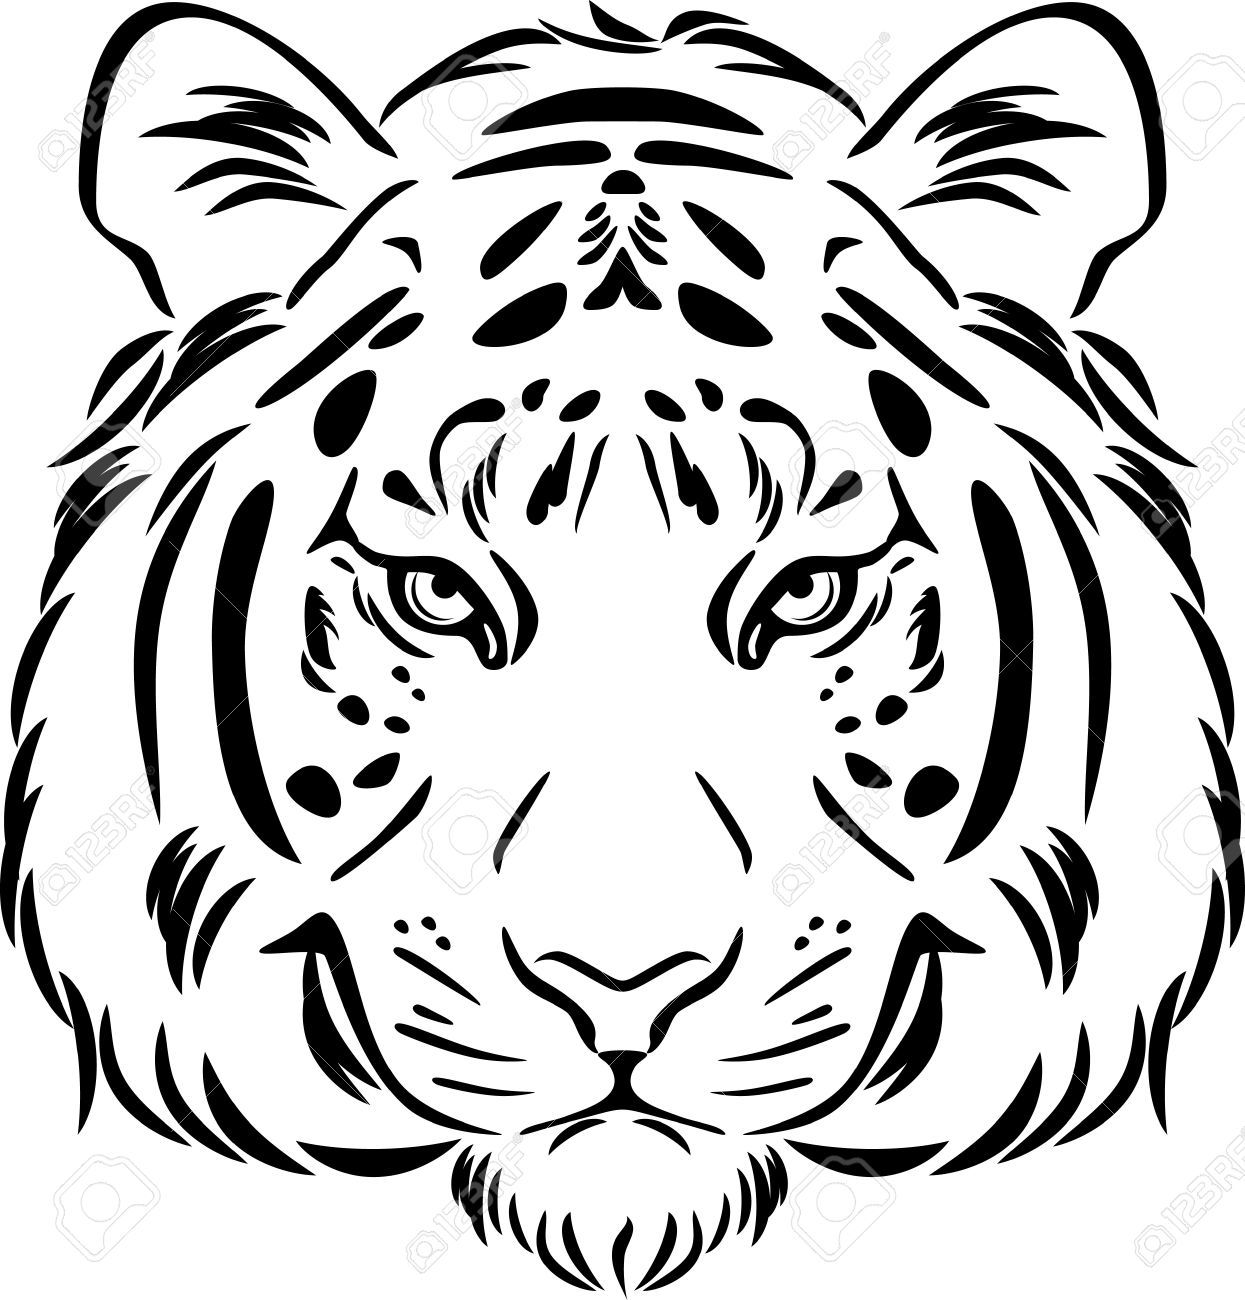 Tiger head black and white clipart